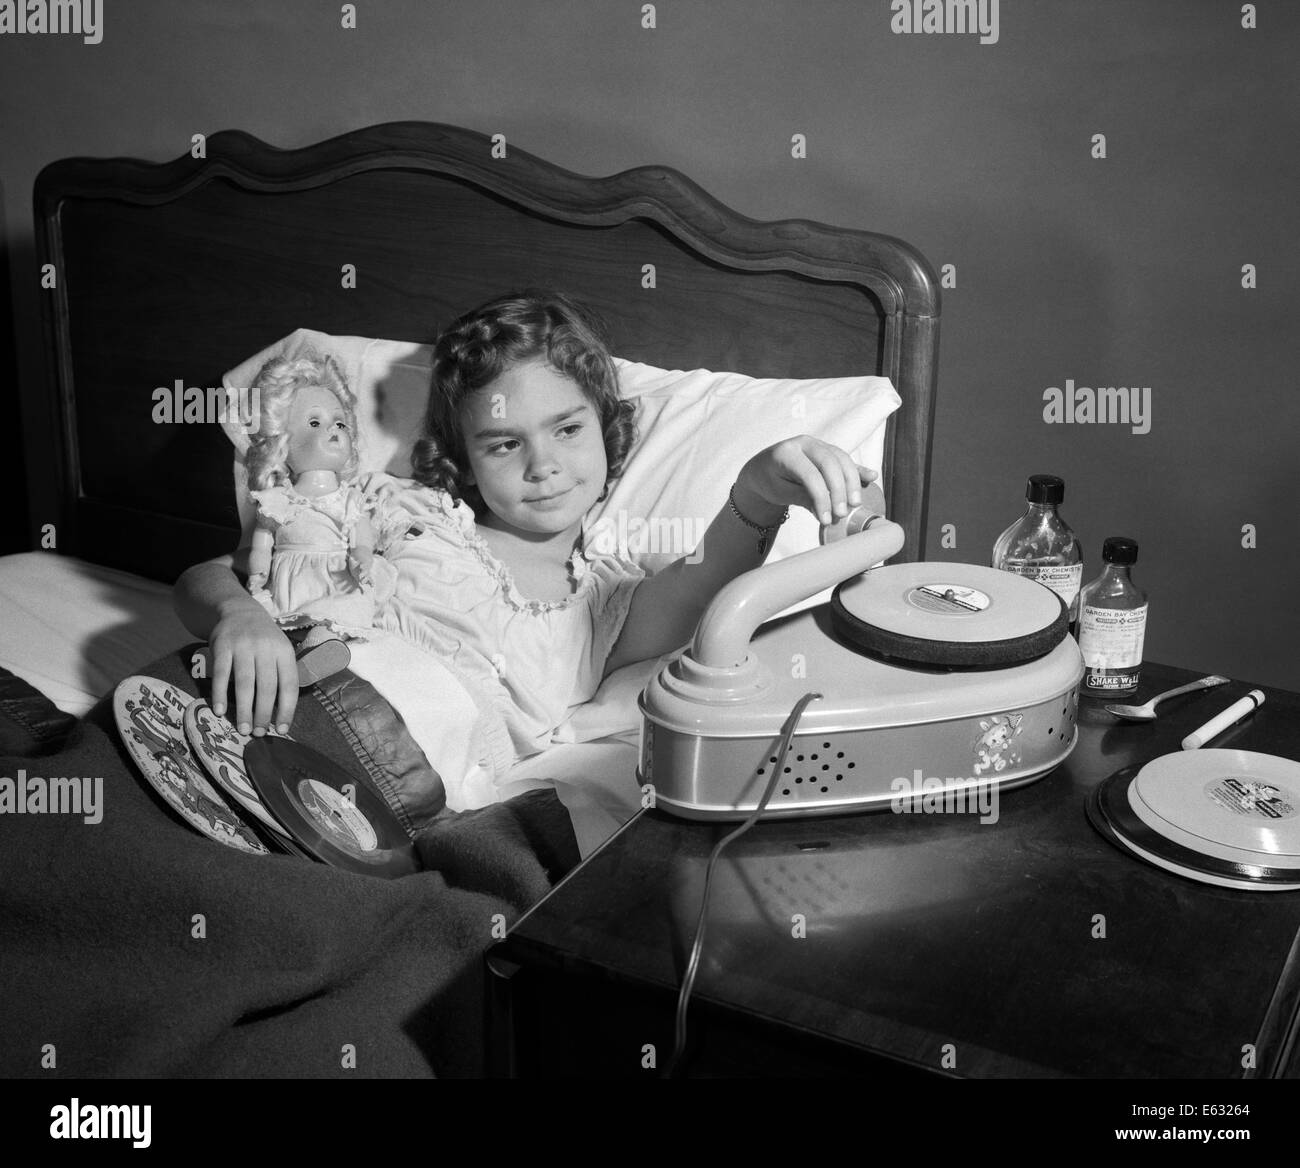 1950s GIRL SICK IN BED PLAYING RECORDS HOLDING BABY DOLL Stock Photo